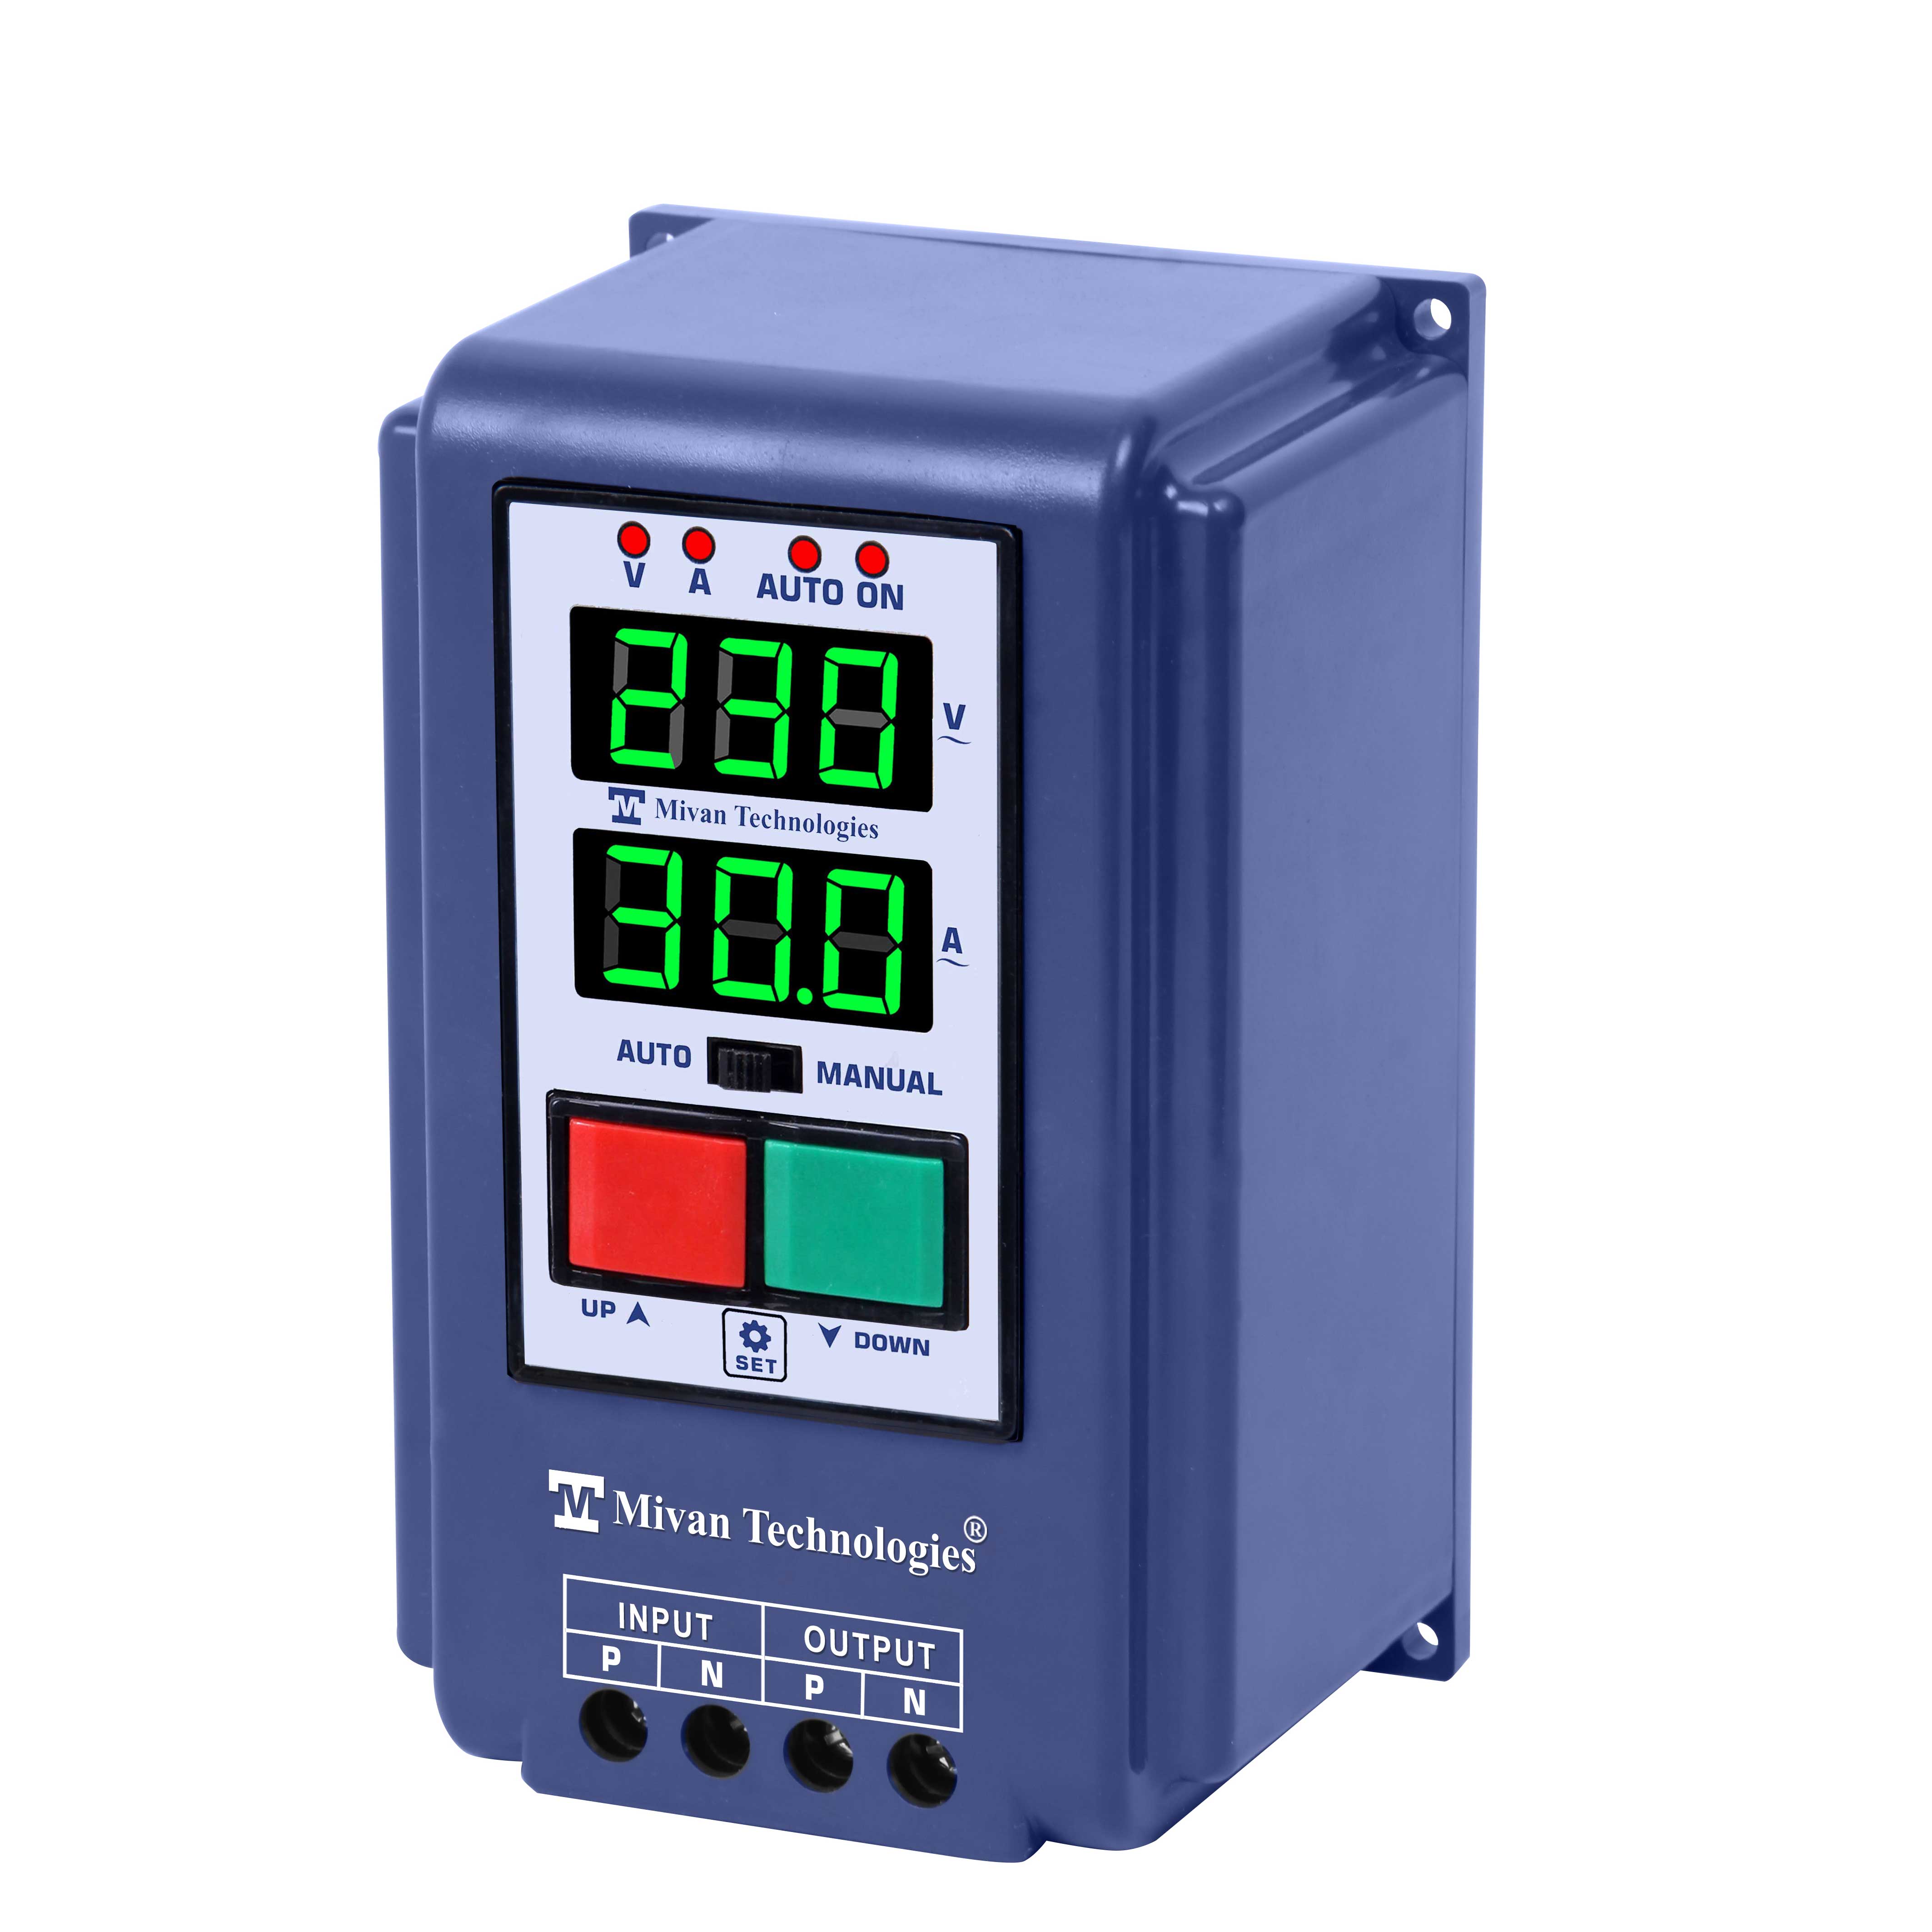 DS HD Single Phase motor starter with HV LV & OL and dry run protection cyclic timer suitable for all single phase appliances Suitable up to 3 hp motor